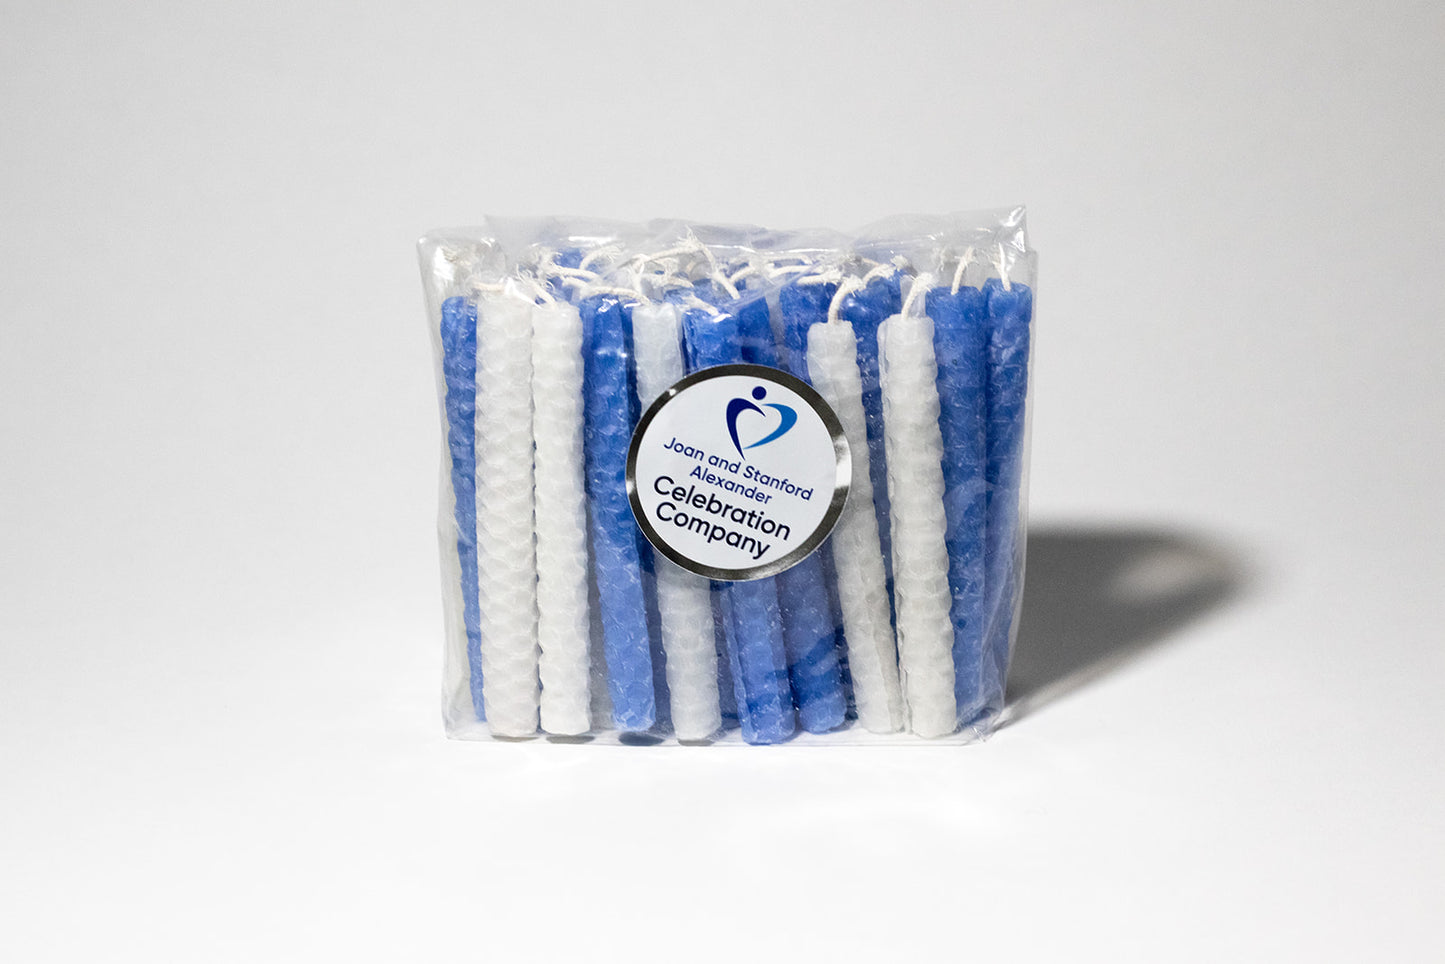 picture of blue and white candles in a bag